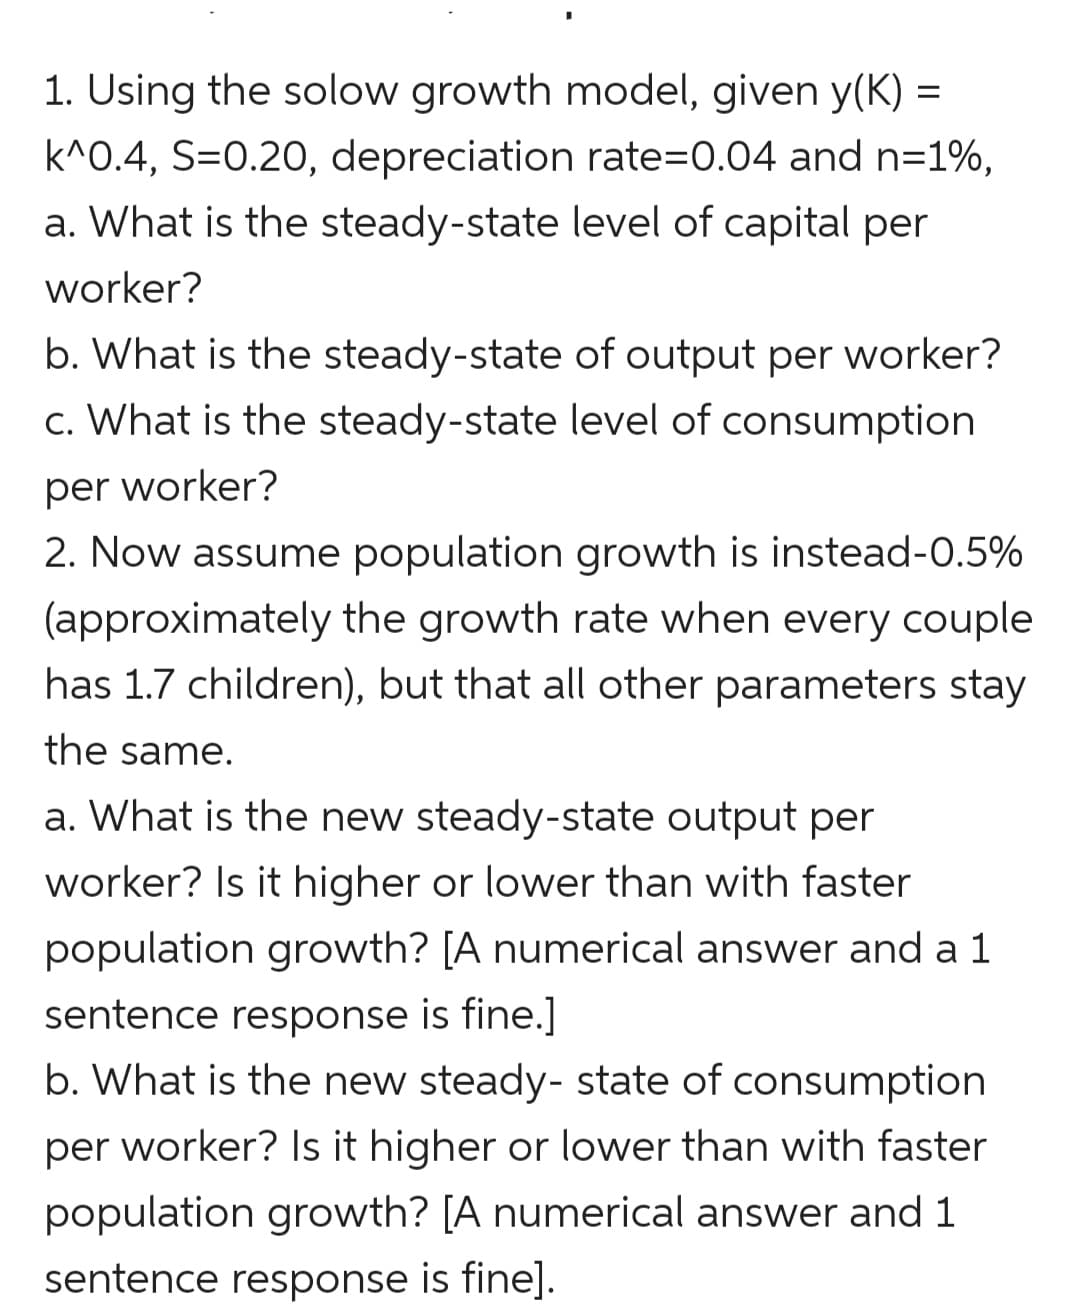 1. Using the solow growth model, given y(K) =
k^0.4, S=0.20, depreciation rate=0.04 and n=1%,
a. What is the steady-state level of capital per
worker?
b. What is the steady-state of output per worker?
c. What is the steady-state level of consumption
per worker?
2. Now assume population growth is instead-0.5%
(approximately the growth rate when every couple
has 1.7 children), but that all other parameters stay
the same.
a. What is the new steady-state output per
worker? Is it higher or lower than with faster
population growth? [A numerical answer and a 1
sentence response is fine.]
b. What is the new steady- state of consumption
per worker? Is it higher or lower than with faster
population growth? [A numerical answer and 1
sentence response is fine].
